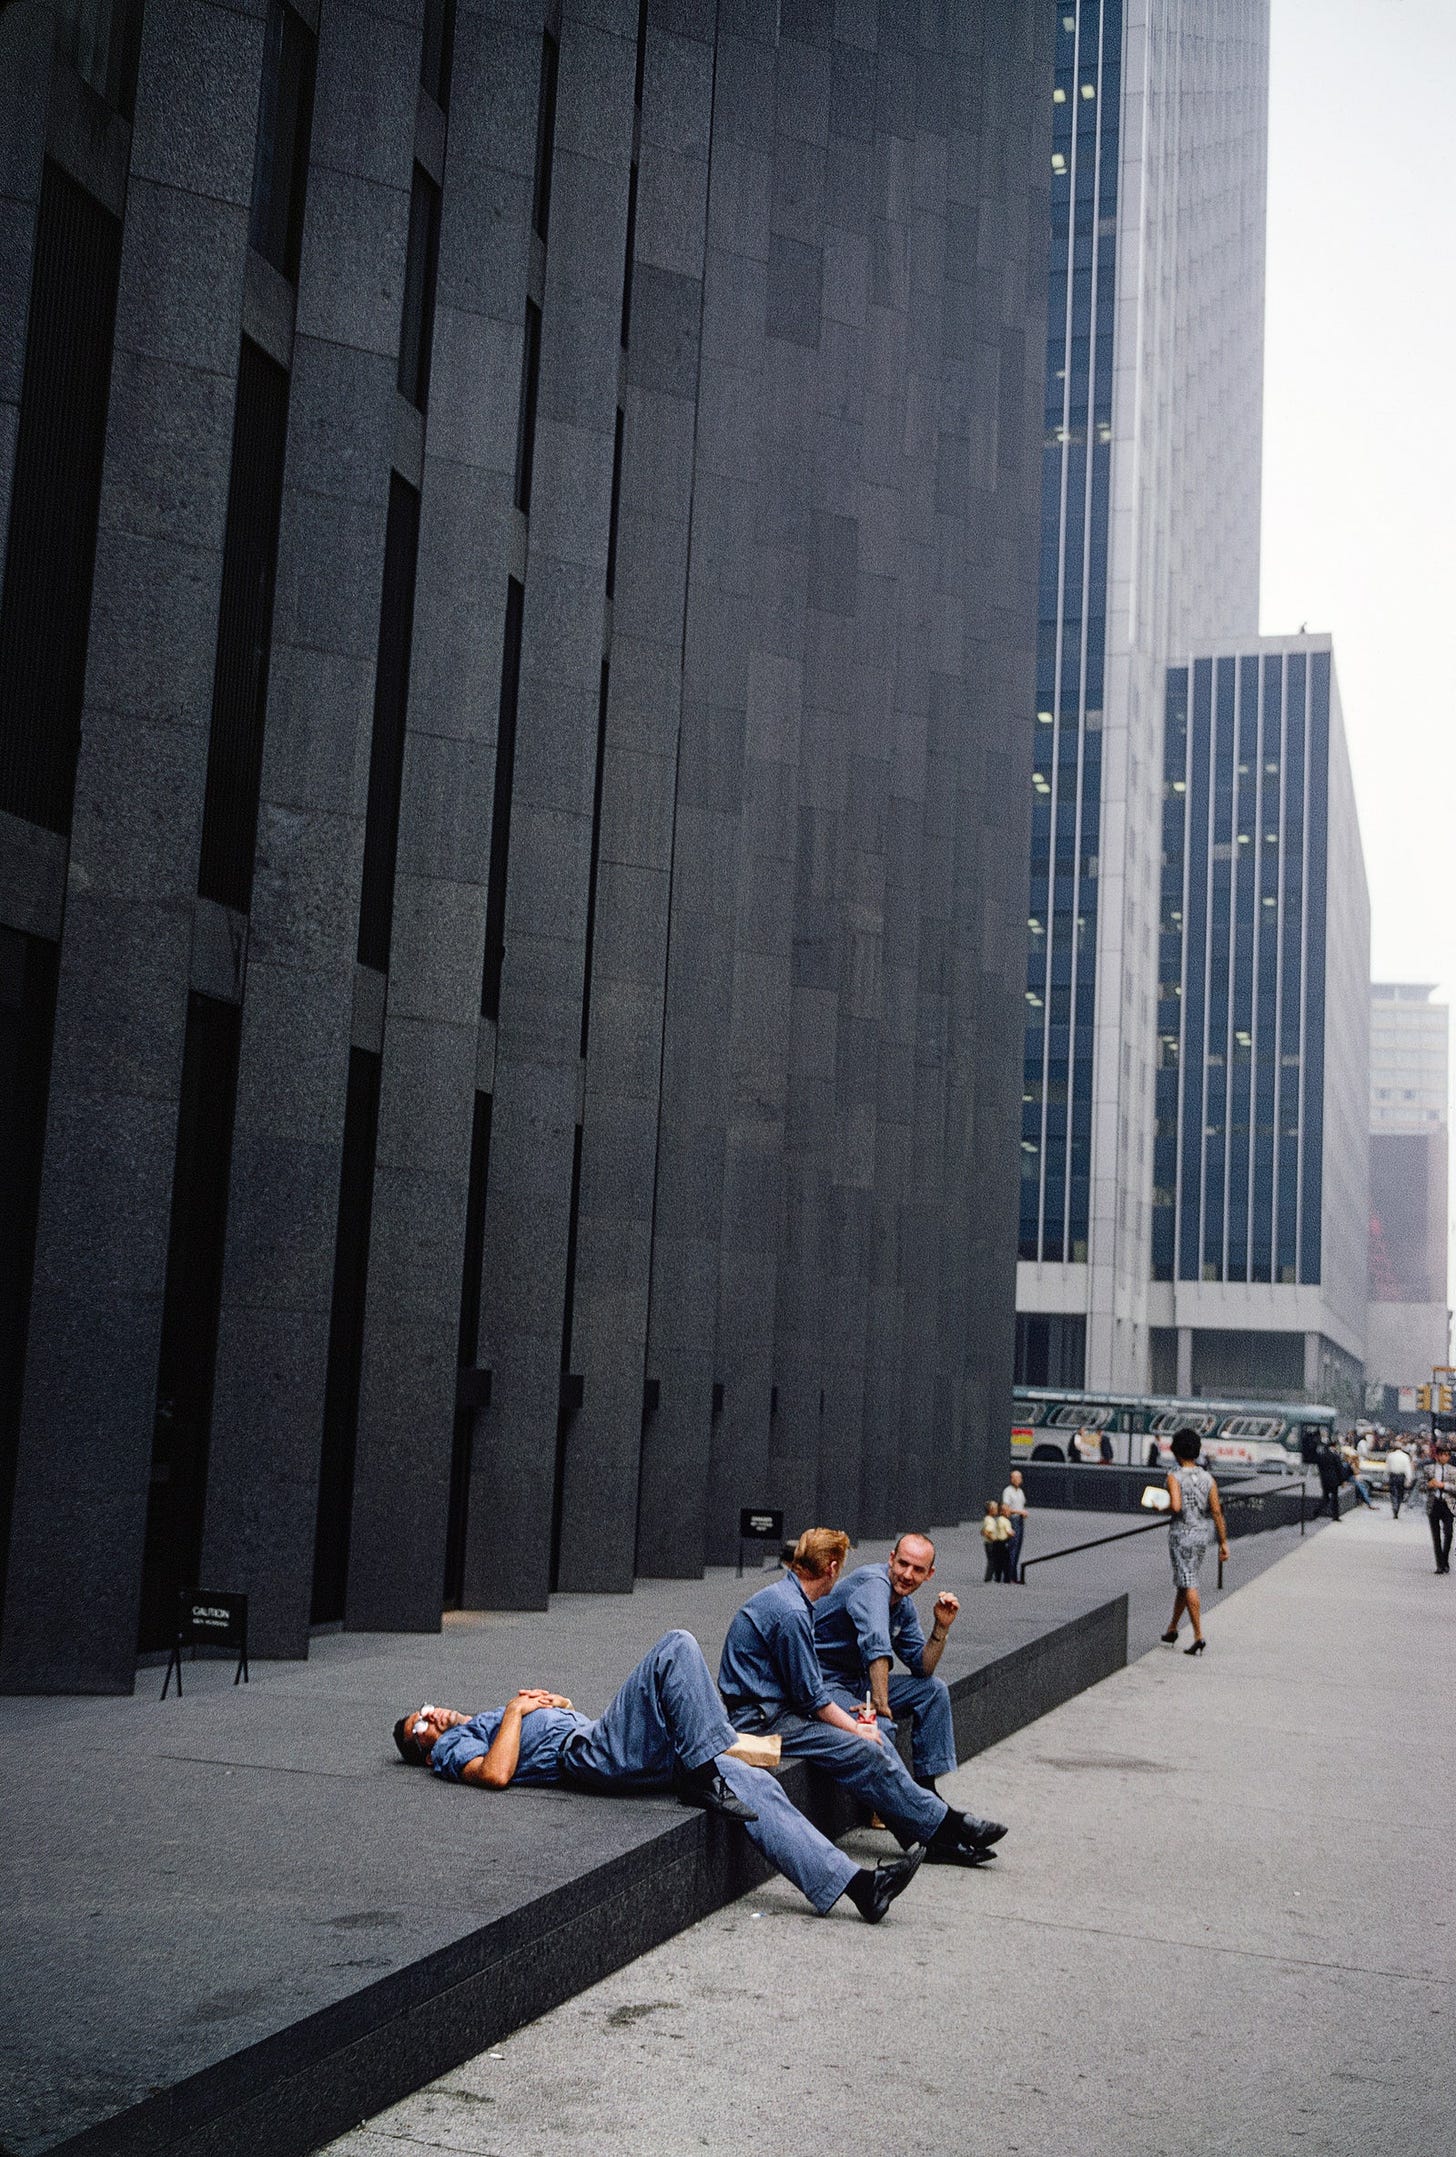 Three people in gray work suits sitting on steps near a skyscraper.